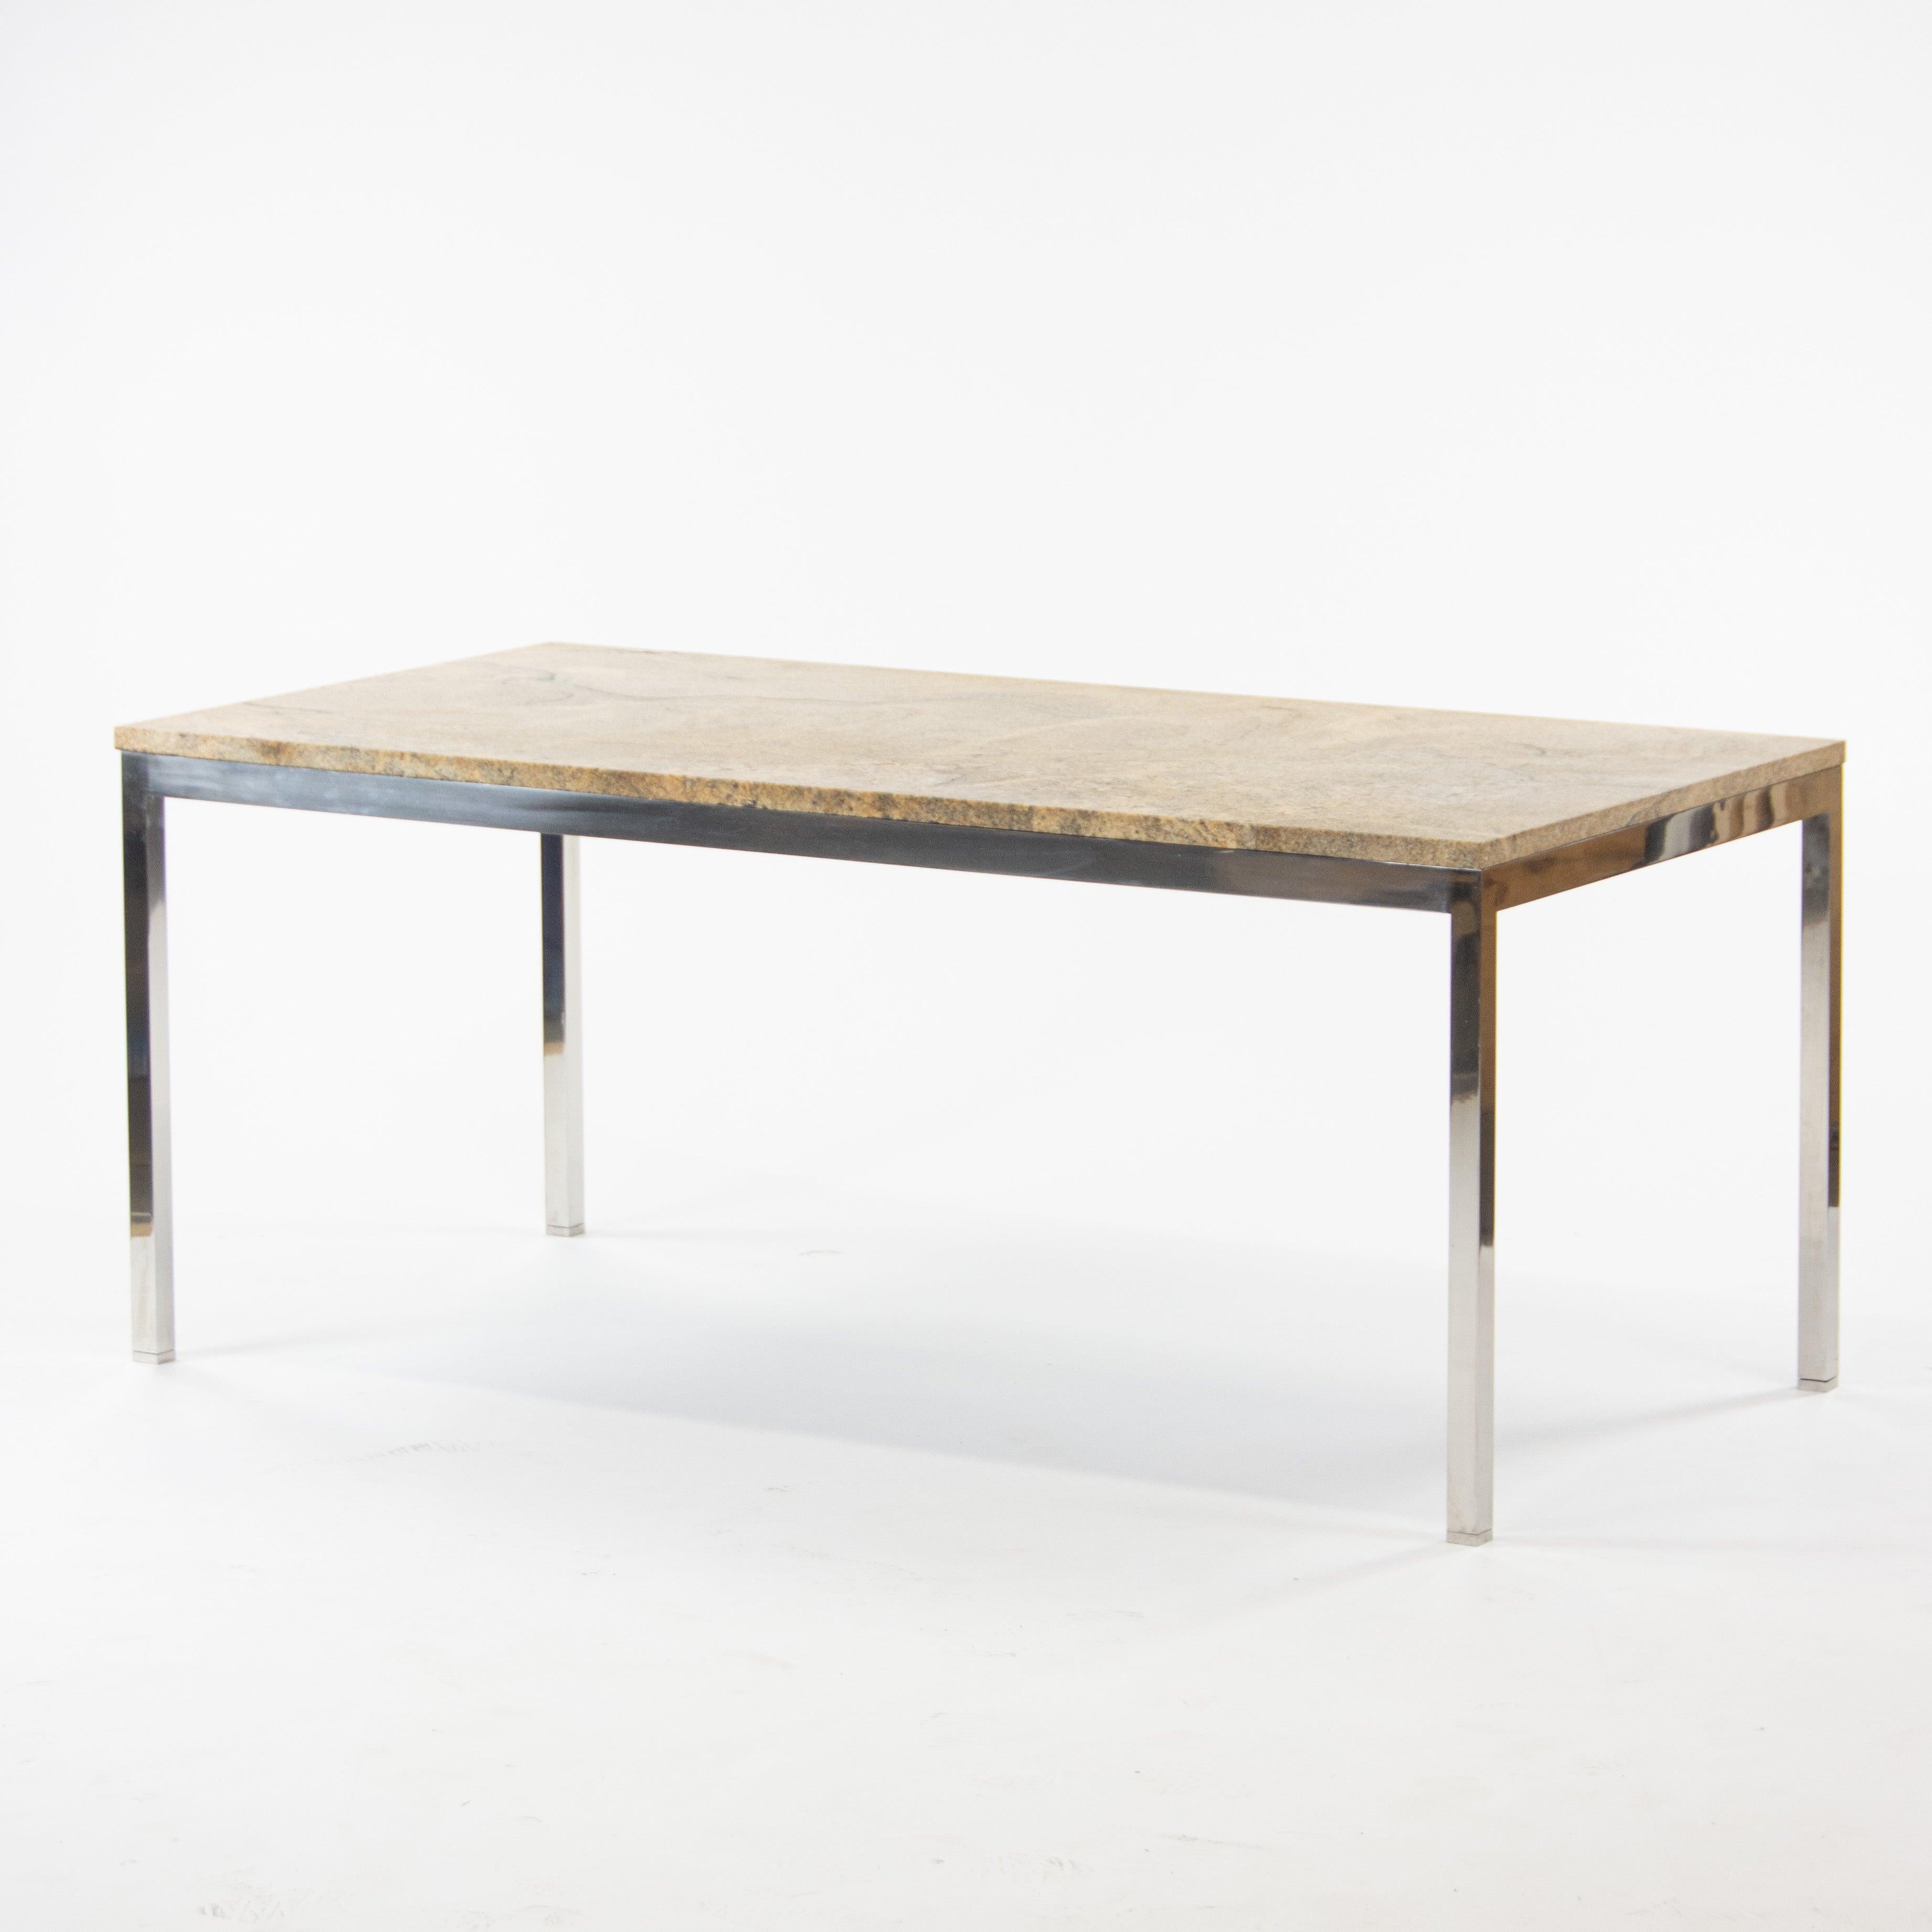 Modern Marble 6x3 Meeting Dining Conference Table Tan w/ Steel Base from SOM Project For Sale